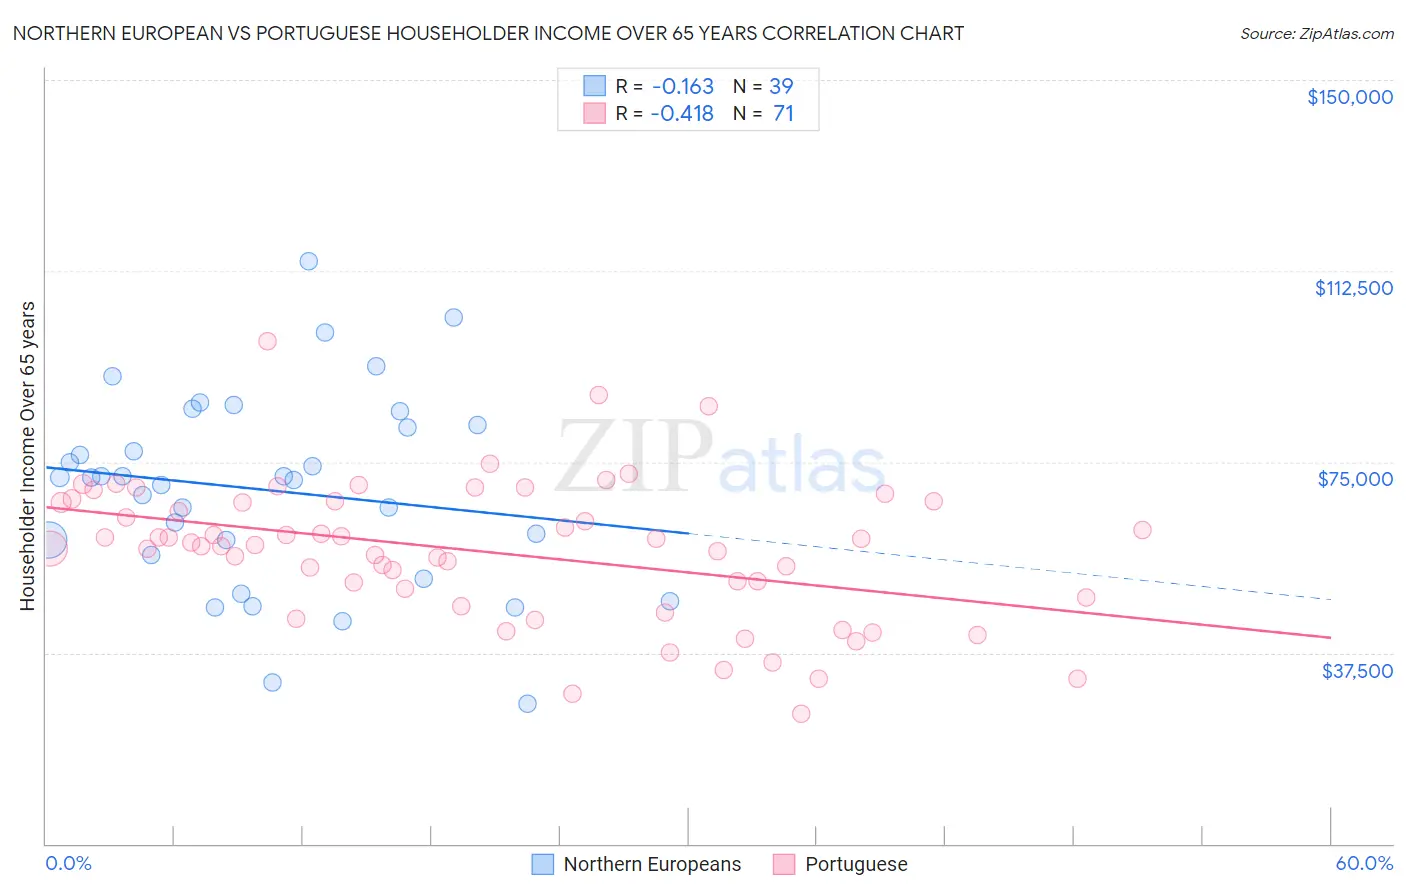 Northern European vs Portuguese Householder Income Over 65 years